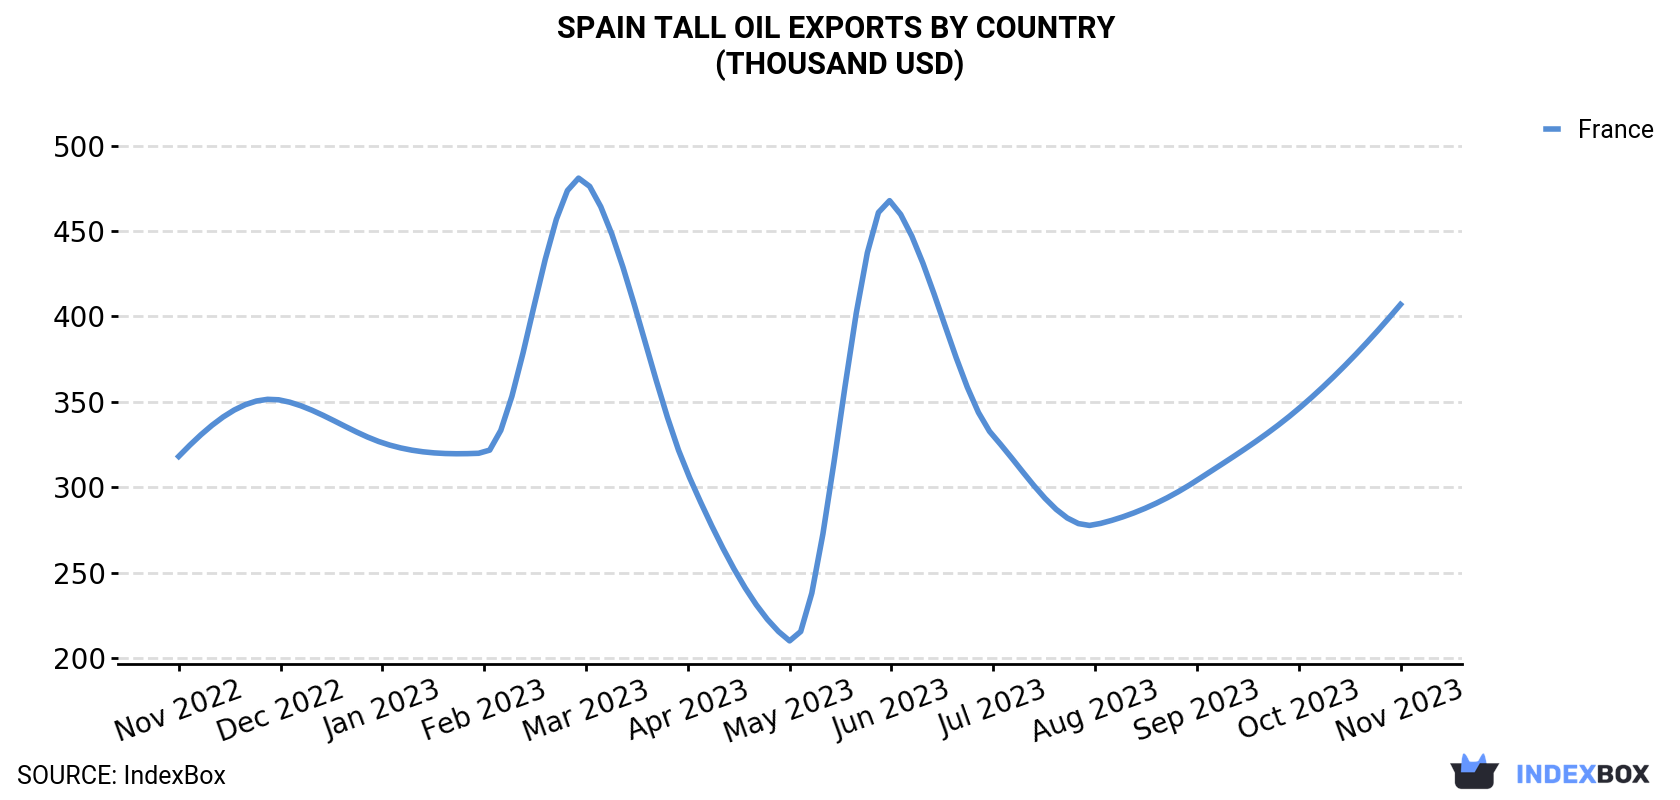 Spain Tall Oil Exports By Country (Thousand USD)